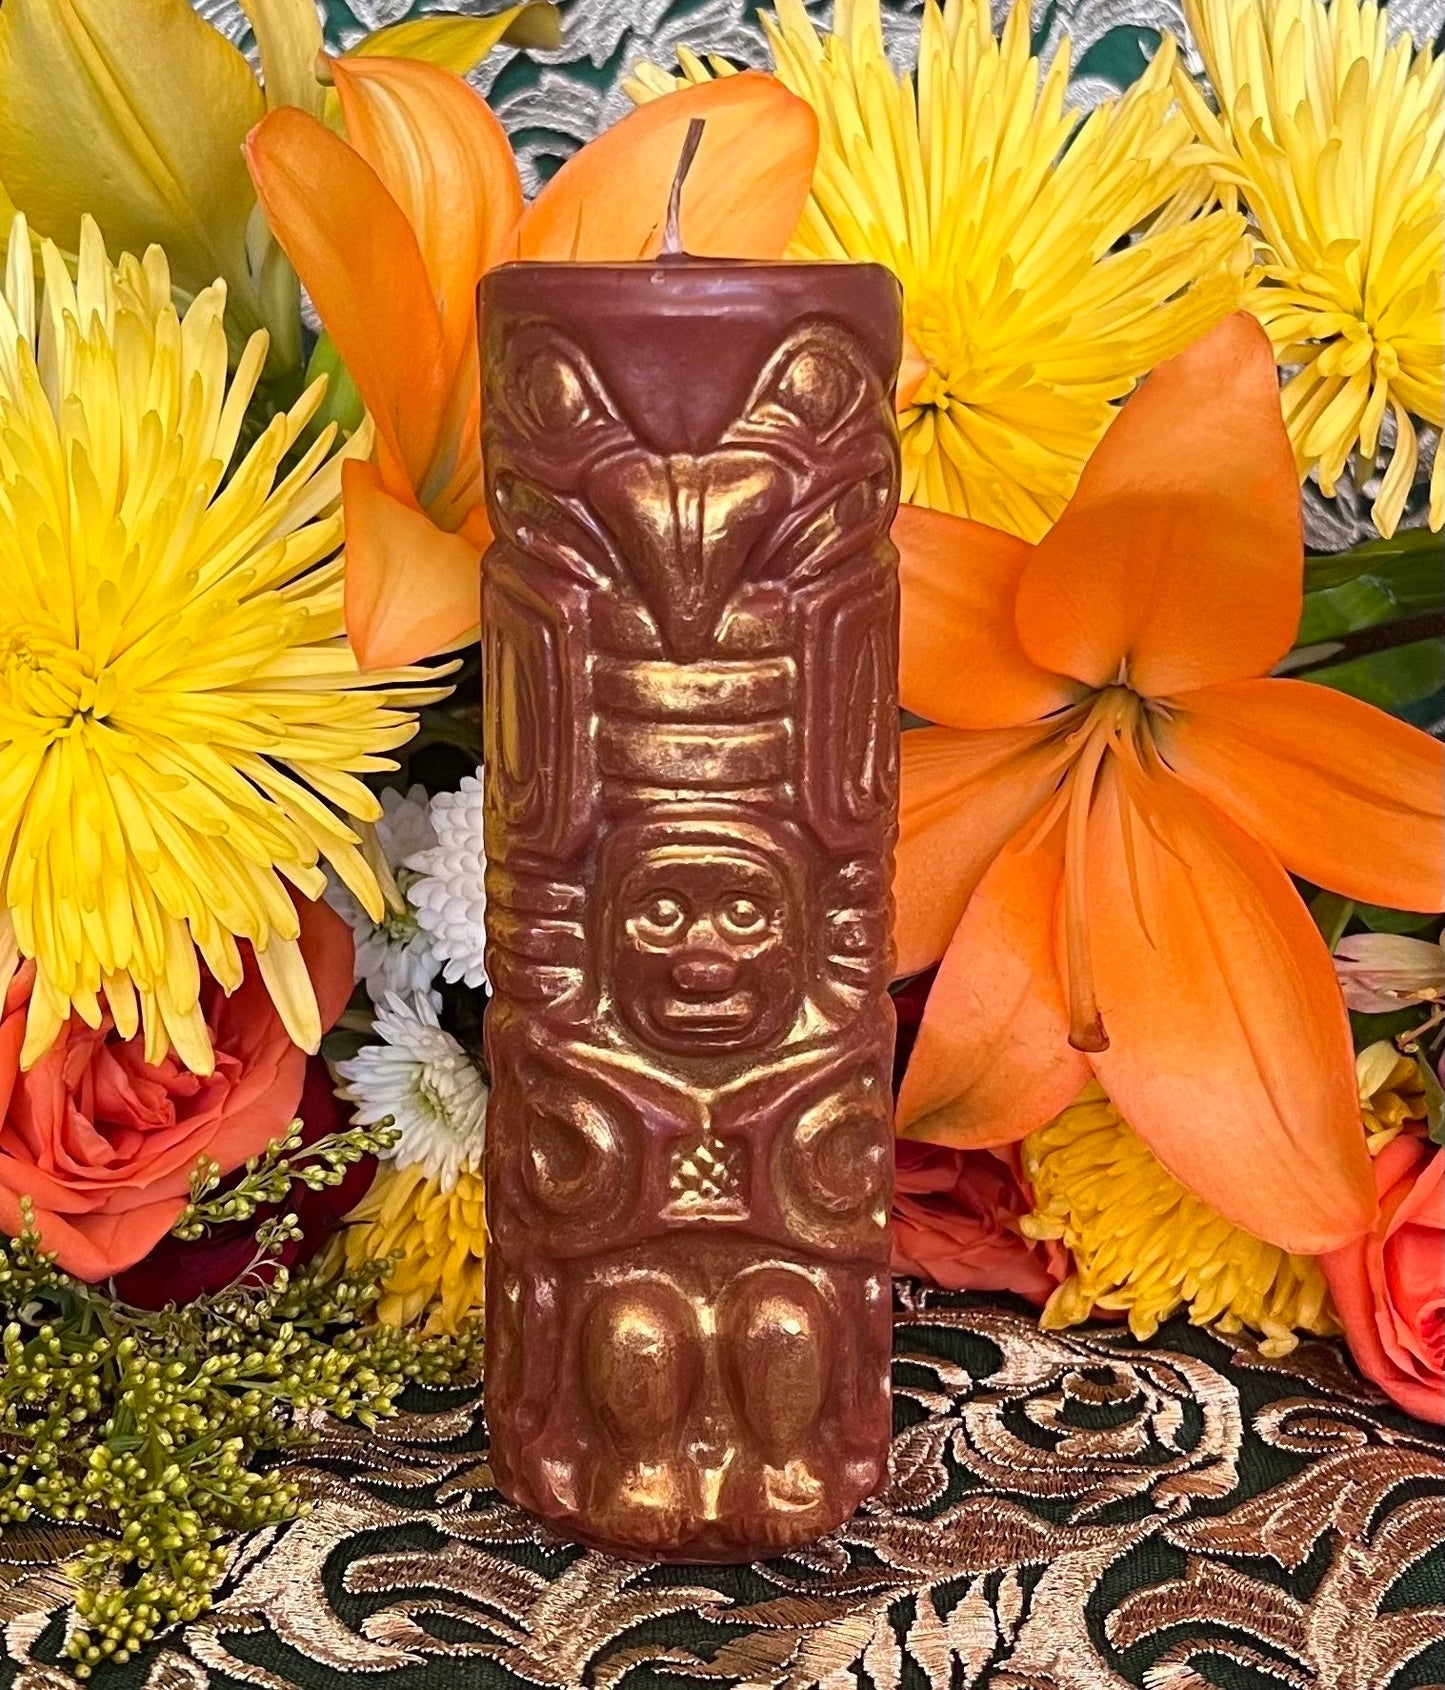 Totem Candle + Indigenous + Native American + American Indian + Indio